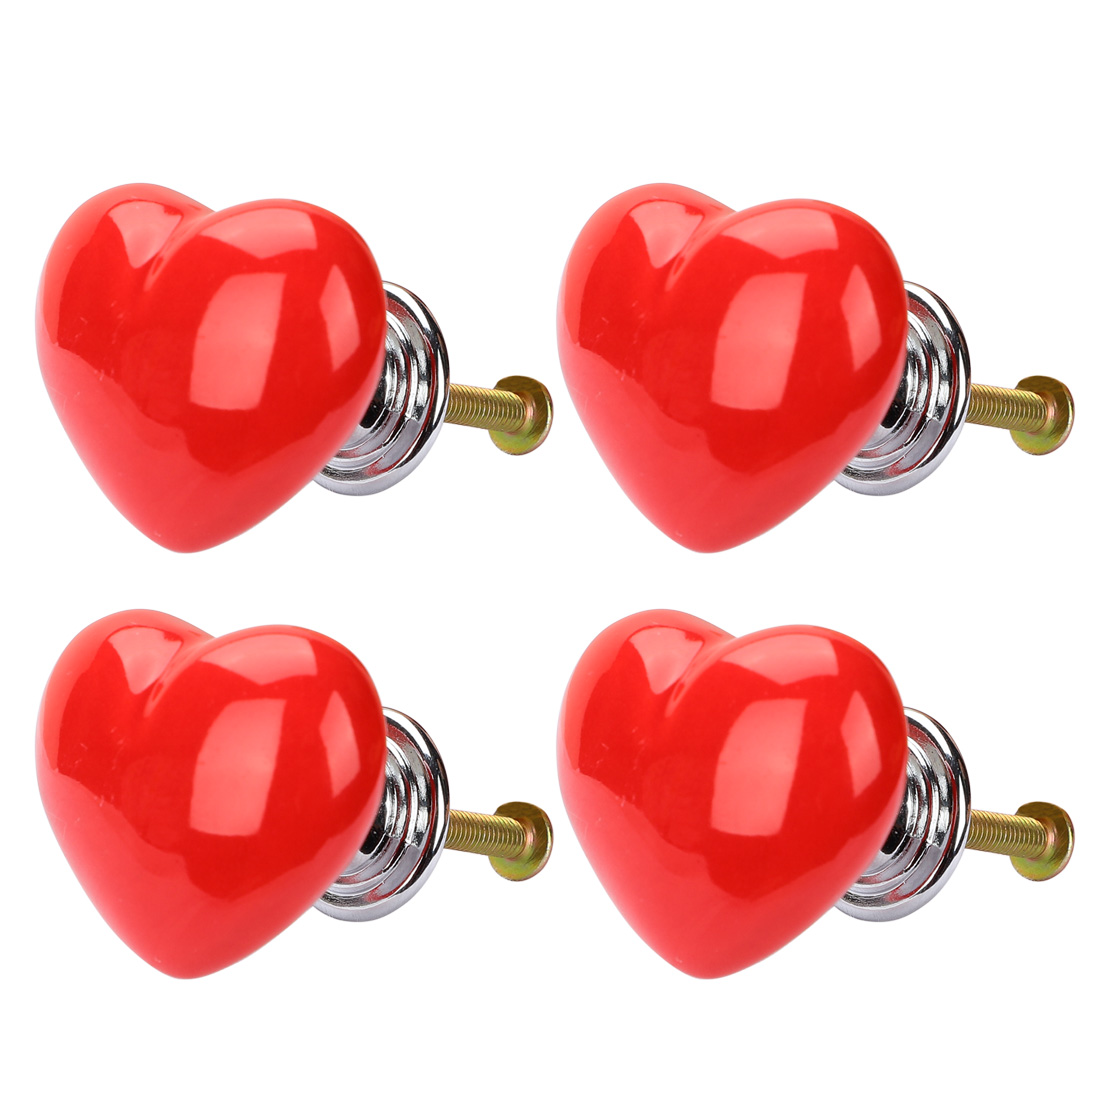 Unique Bargains Ceramic Vintage Knob Drawer Heart Shaped Pull Handle Cupboard Wardrobe Dresser Door Replacement 4pcs Red - image 1 of 6